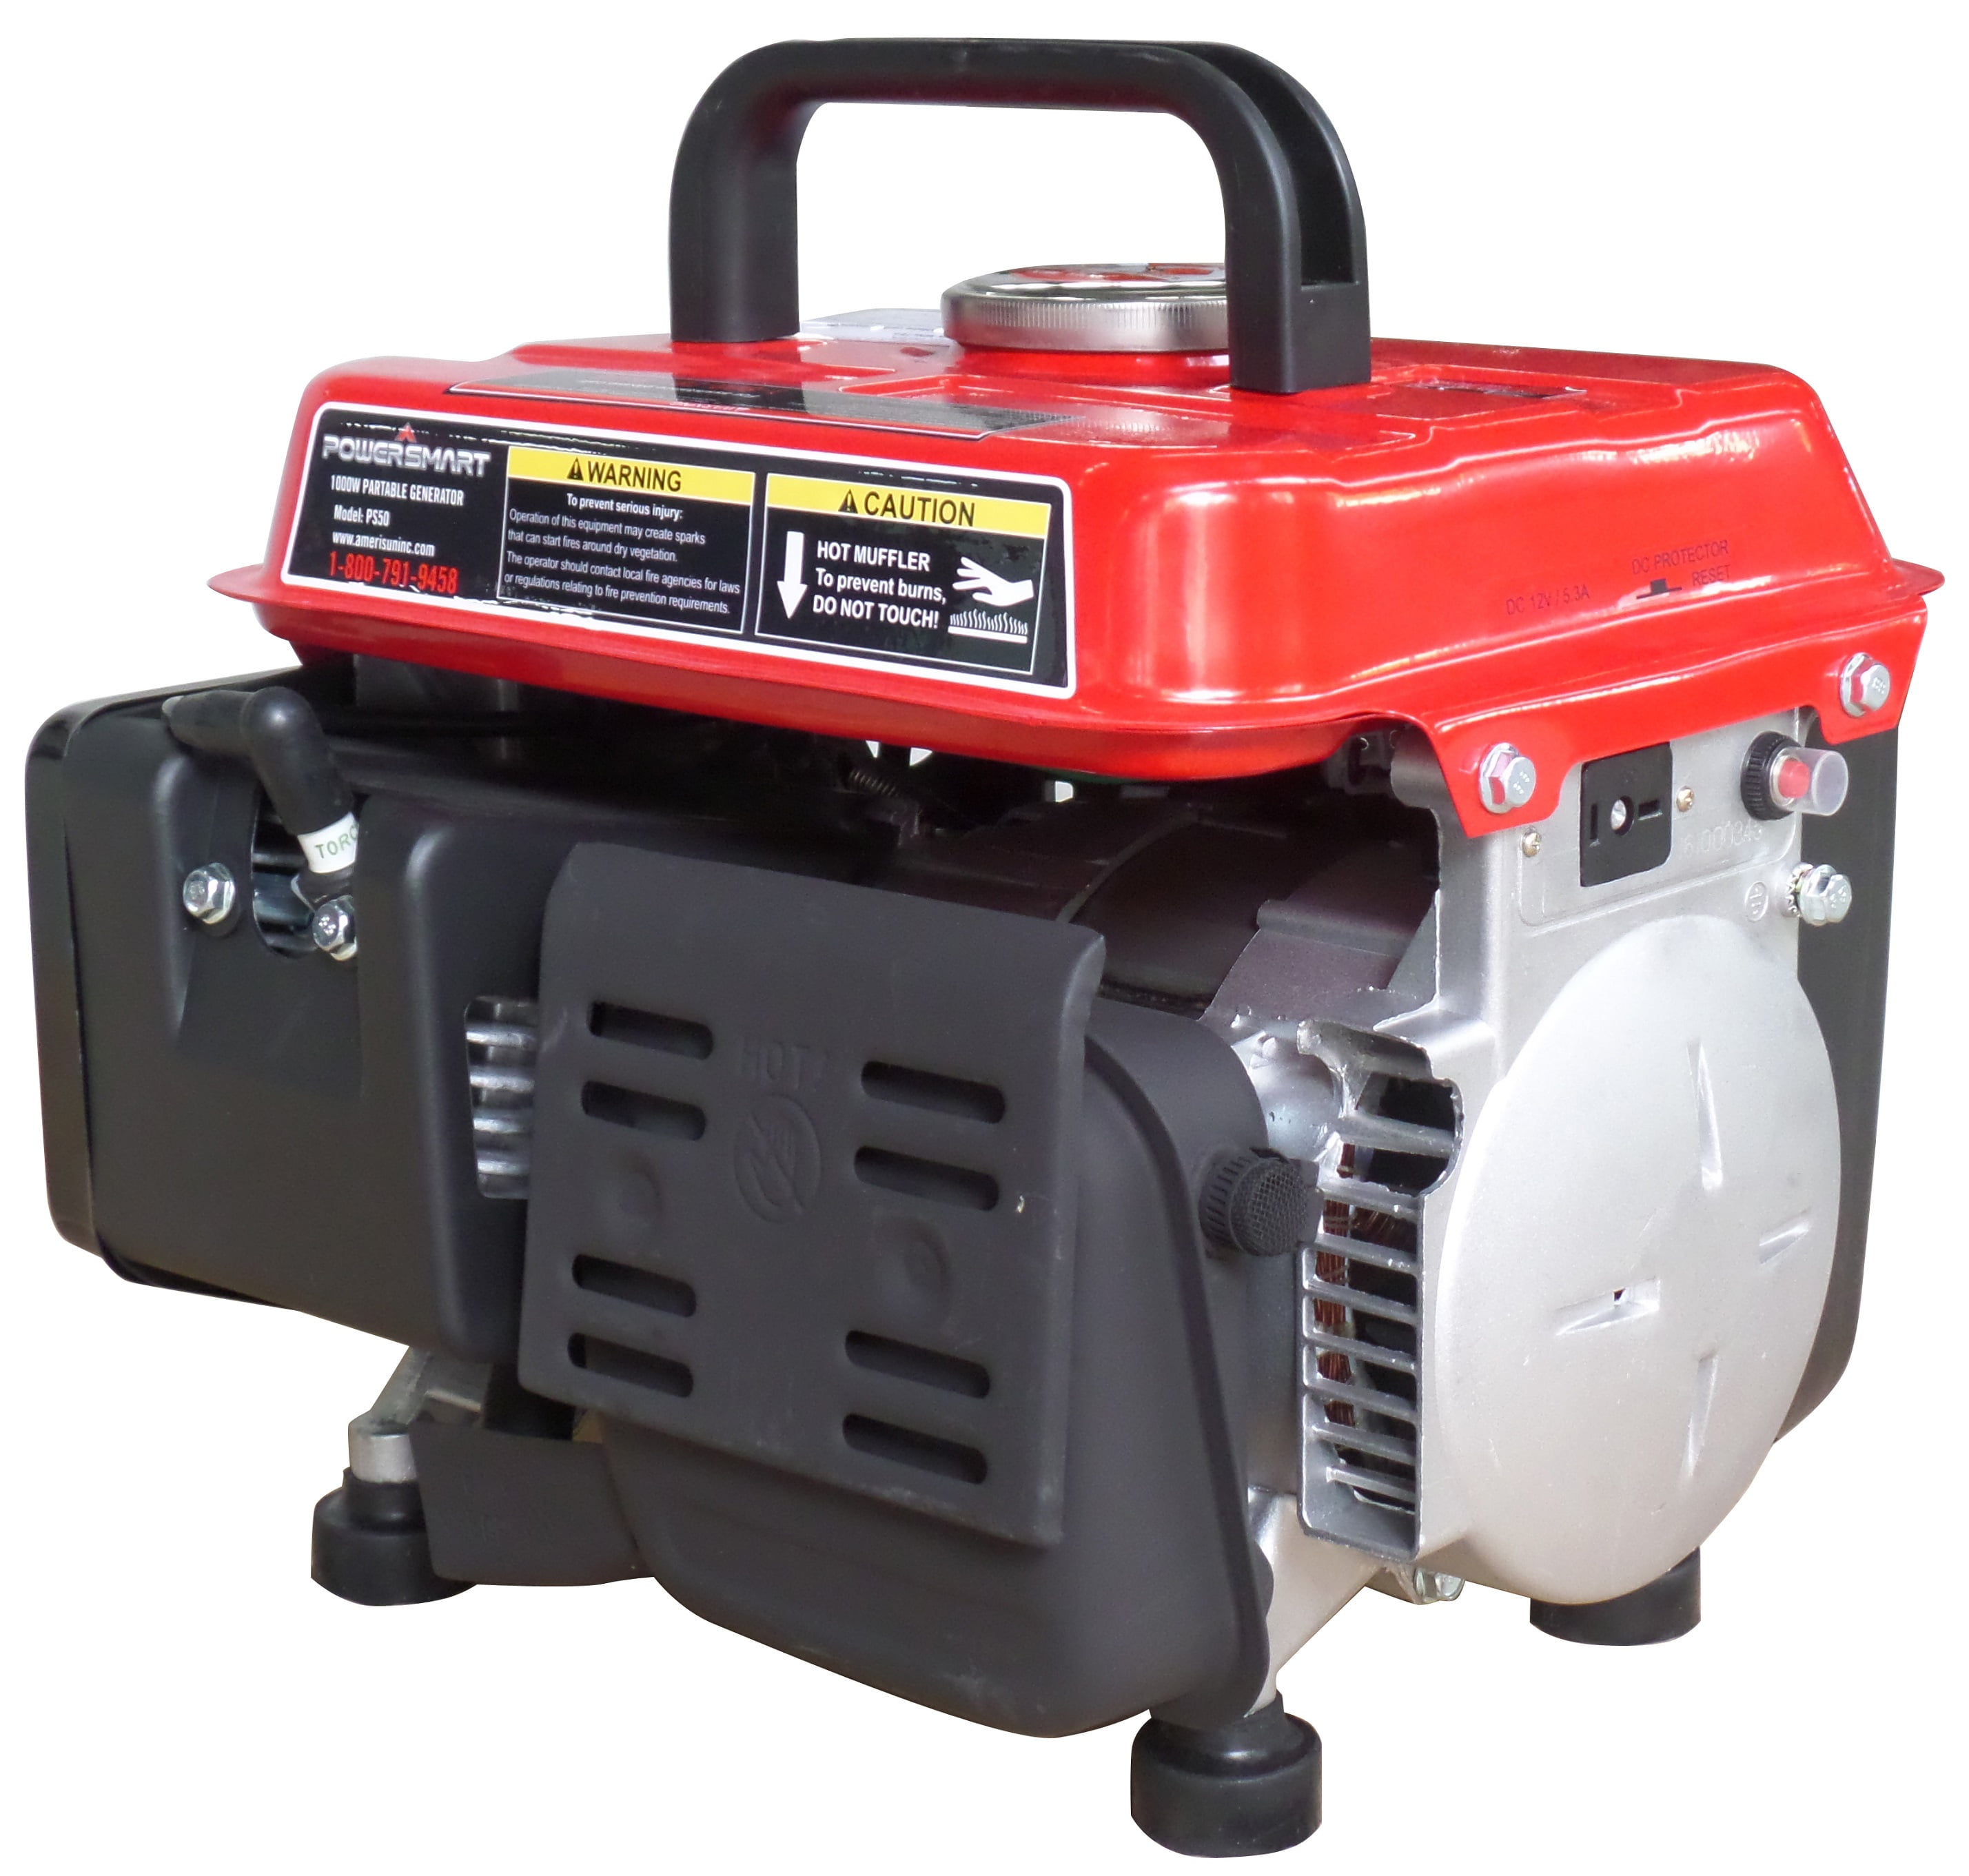 Red/Blac PowerSmart PS50 Portable Generator Pack of 1 